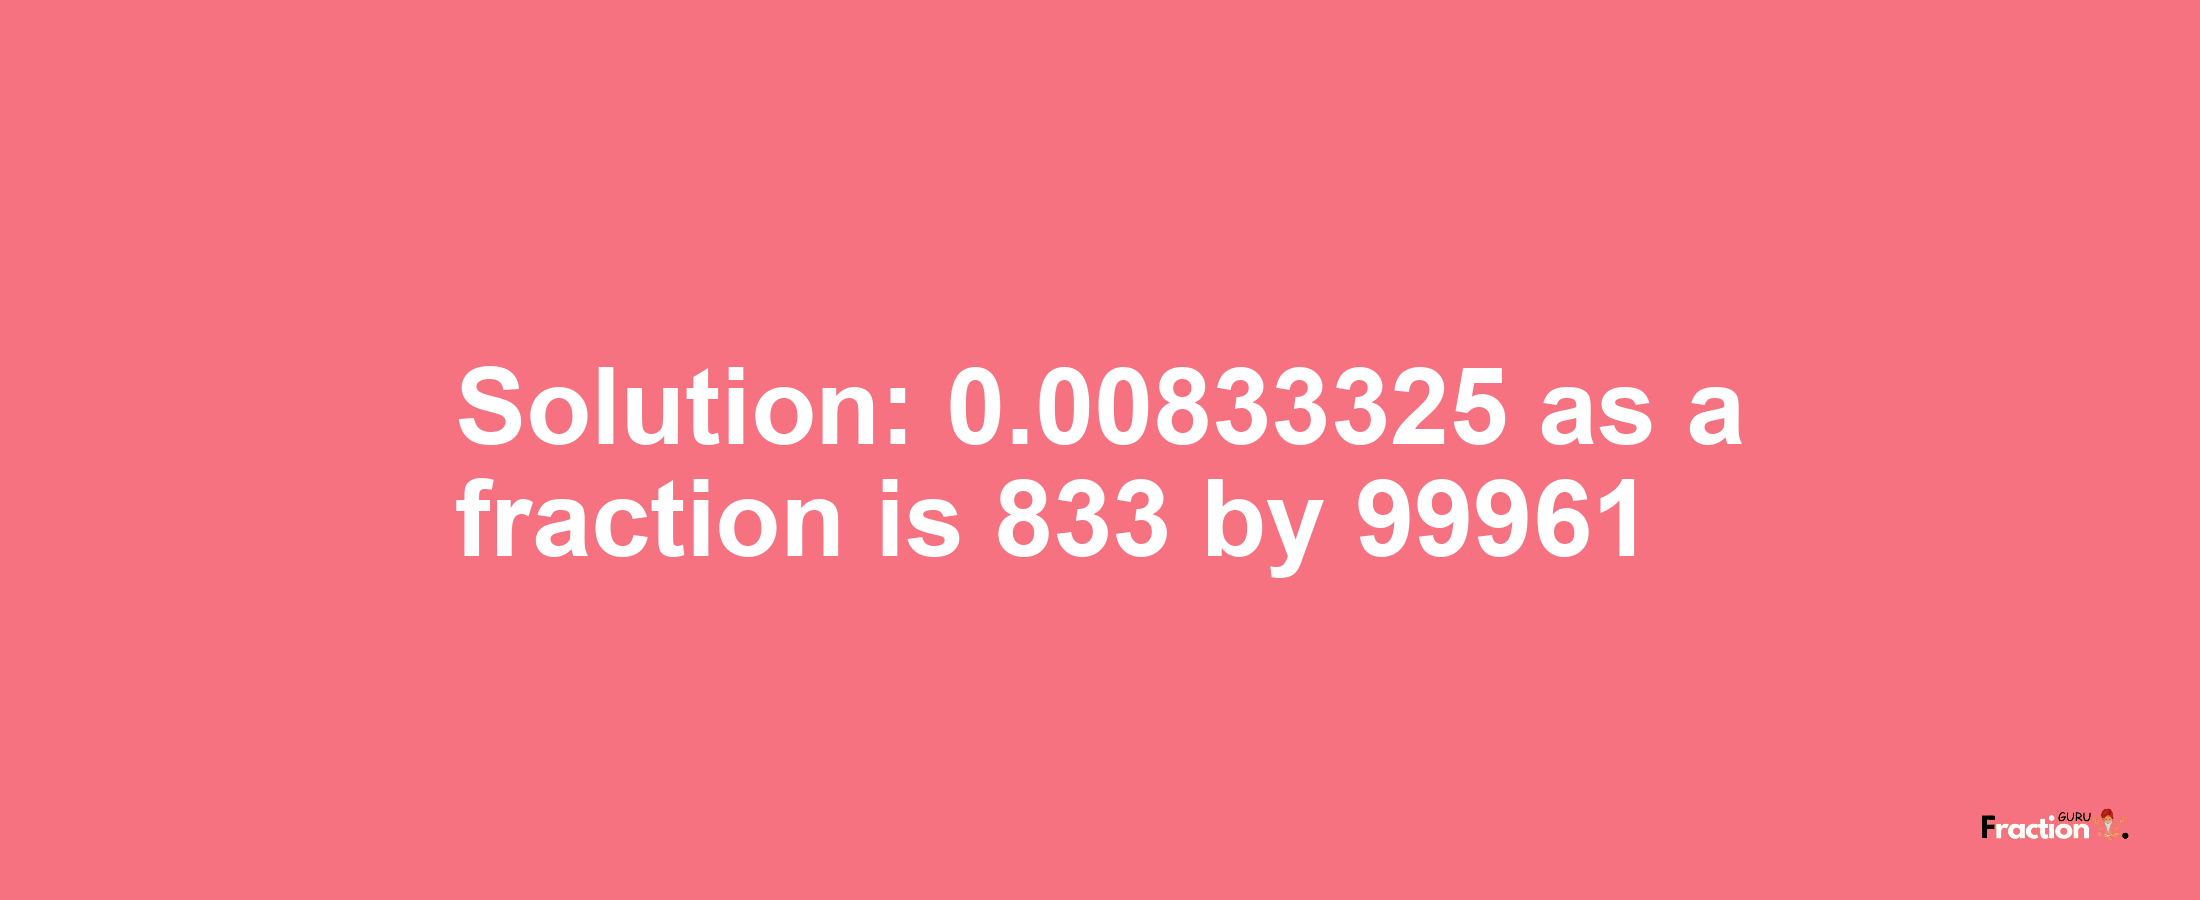 Solution:0.00833325 as a fraction is 833/99961